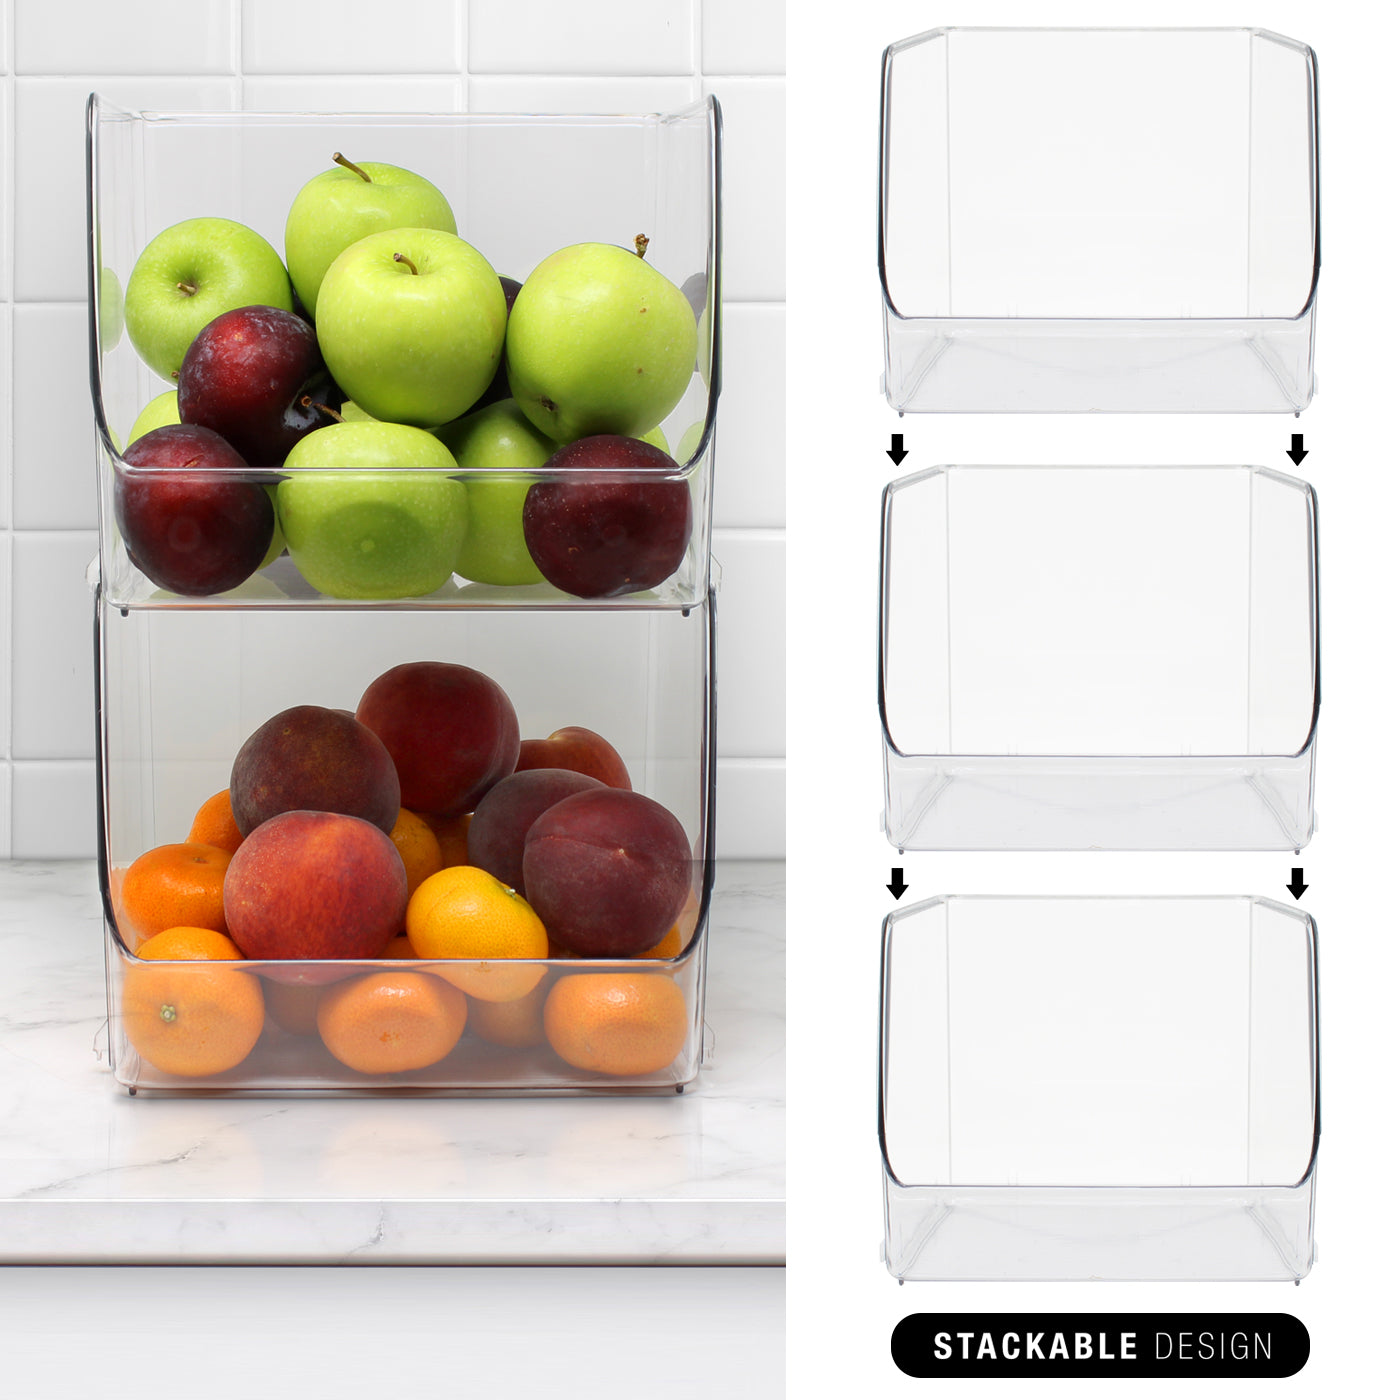 Sorbus Plastic Storage Bins Stackable Clear Pantry Organizer Box Bin  Containers For Organizing Kitchen Fruit, Vegetables, Supplies (Wide - Pack  Of 6)